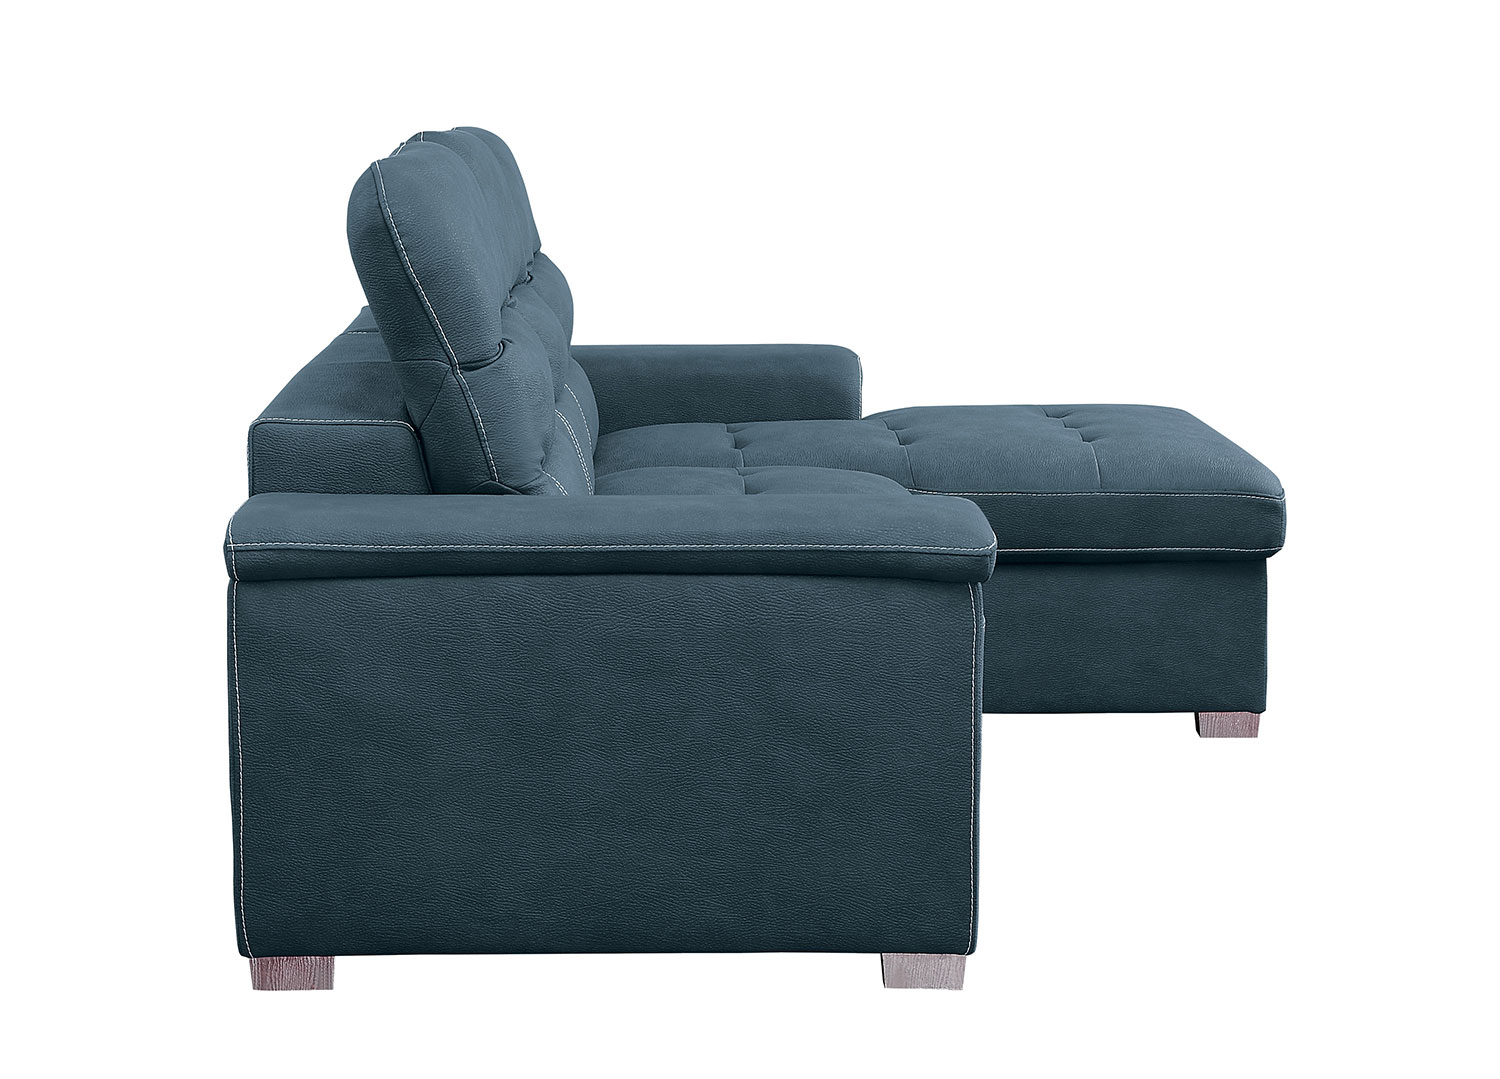 Homelegance Alfio Sectional with Pull-out Bed and Hidden Storage - Blue